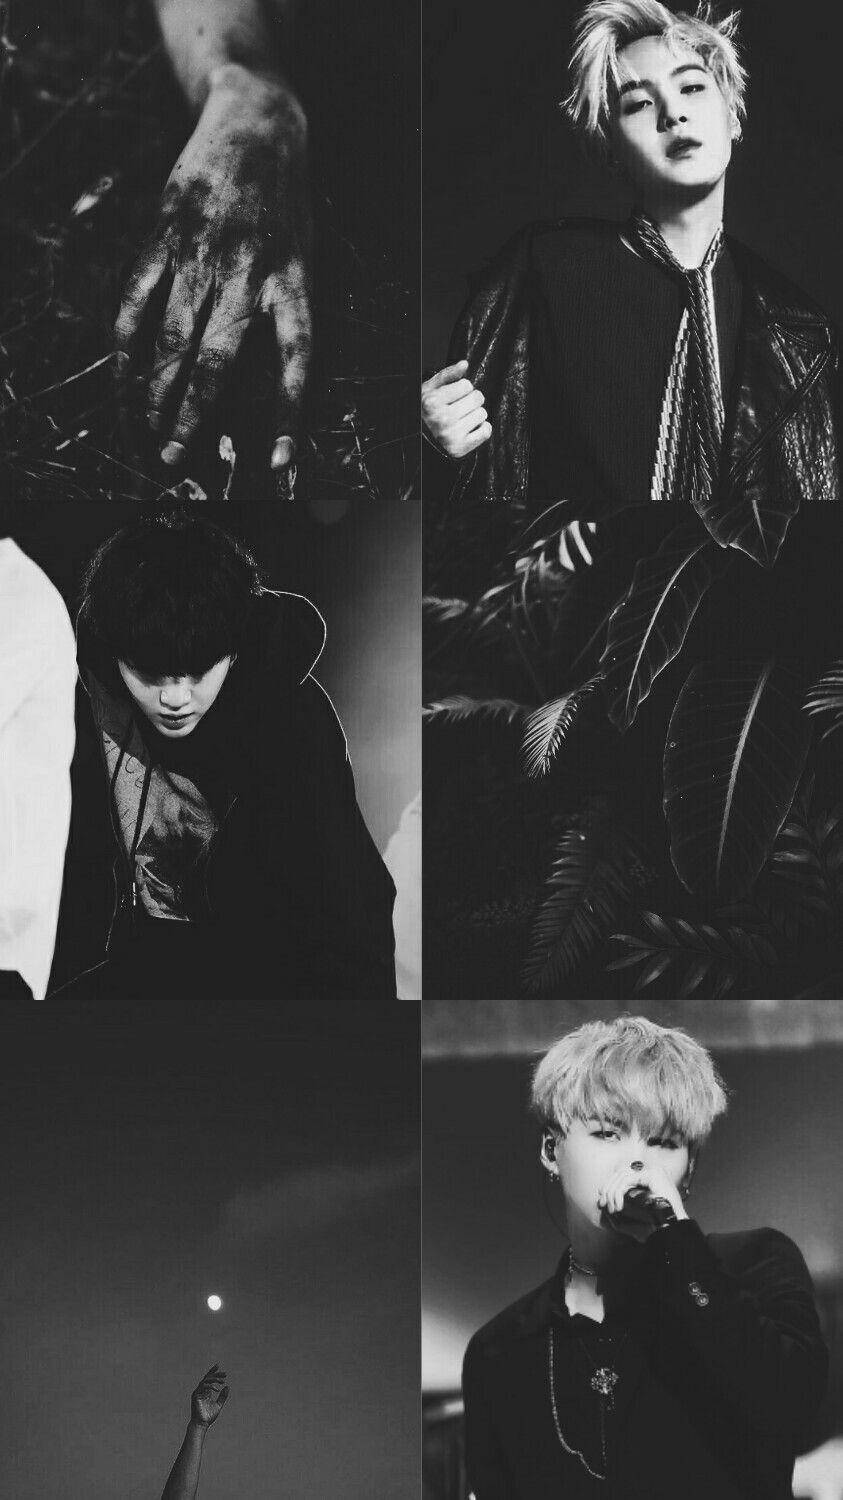 A black and white collage of images of Jimin of BTS - Suga